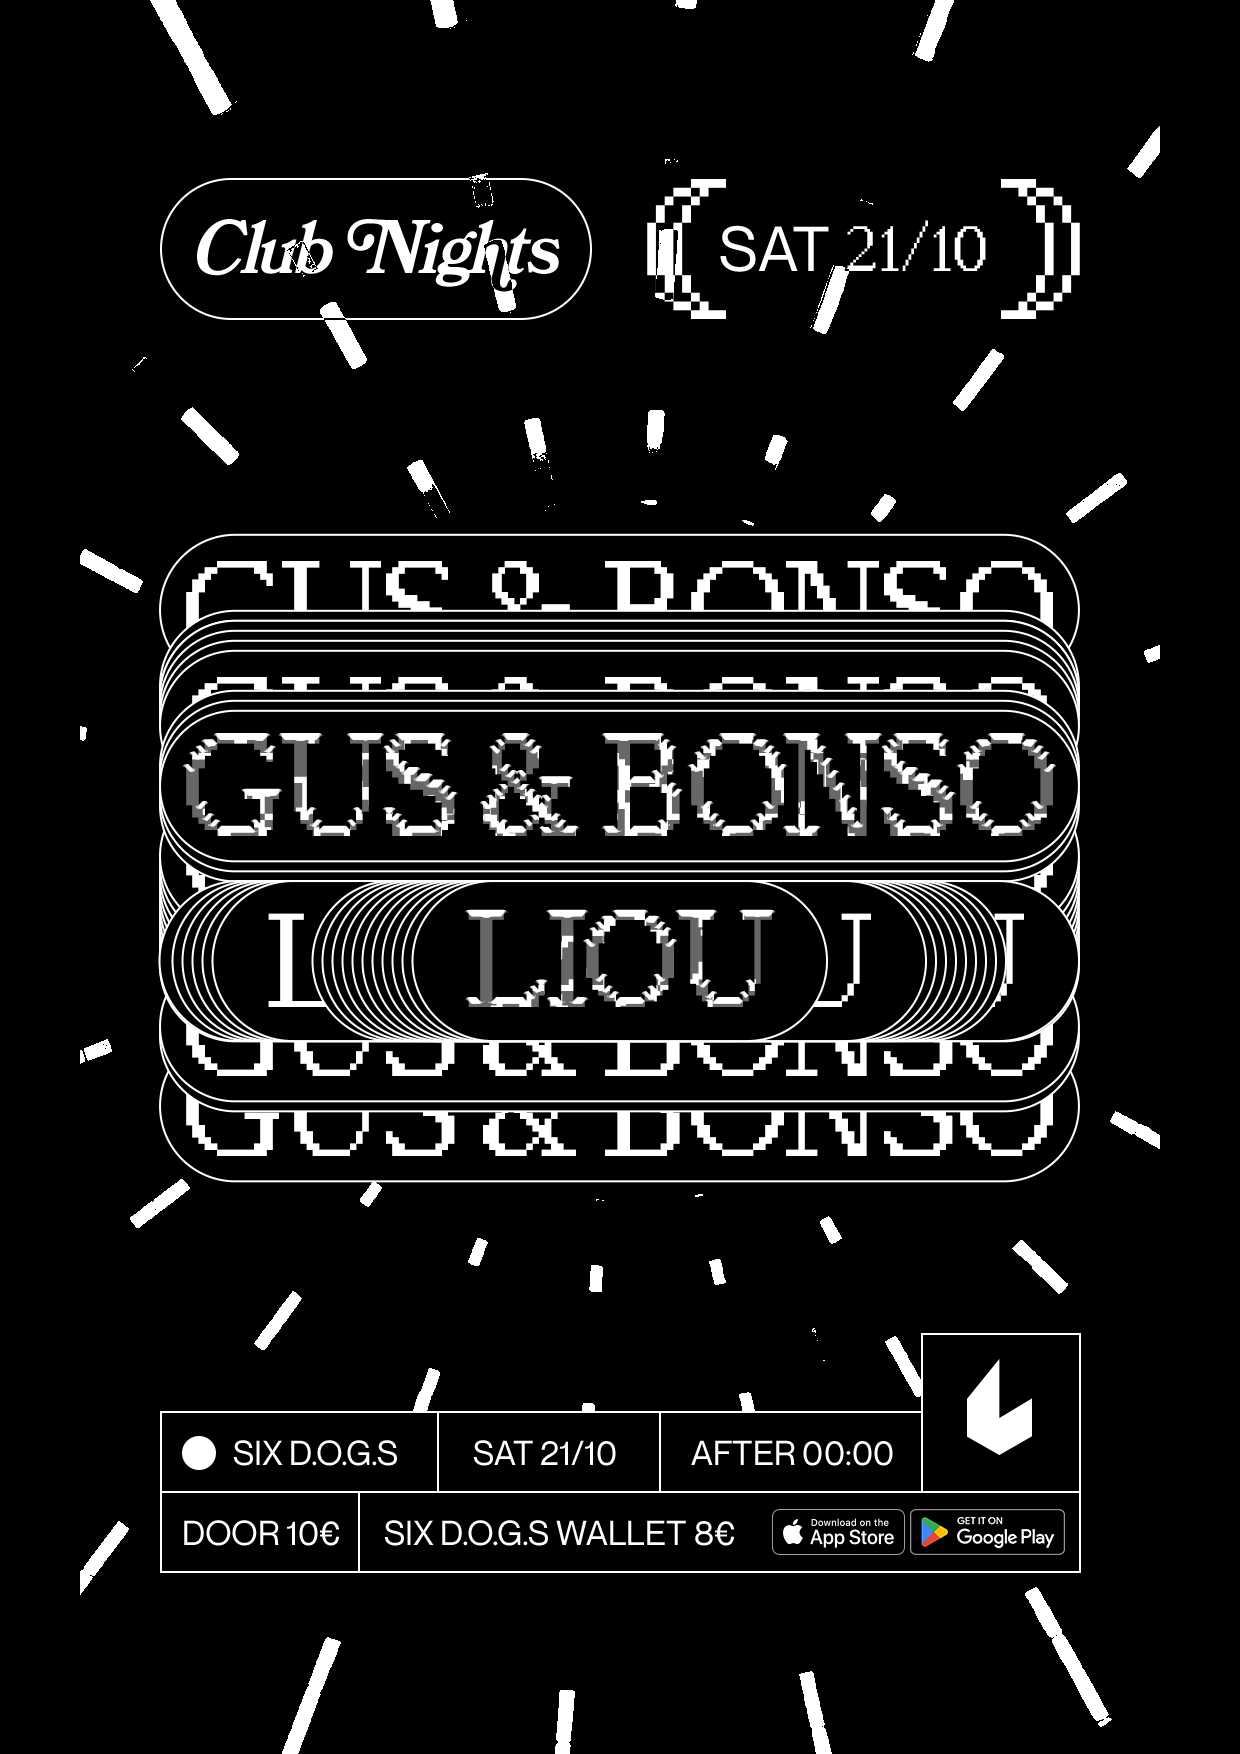 SIX D.O.G.S: Gus & Bonso - フライヤー表